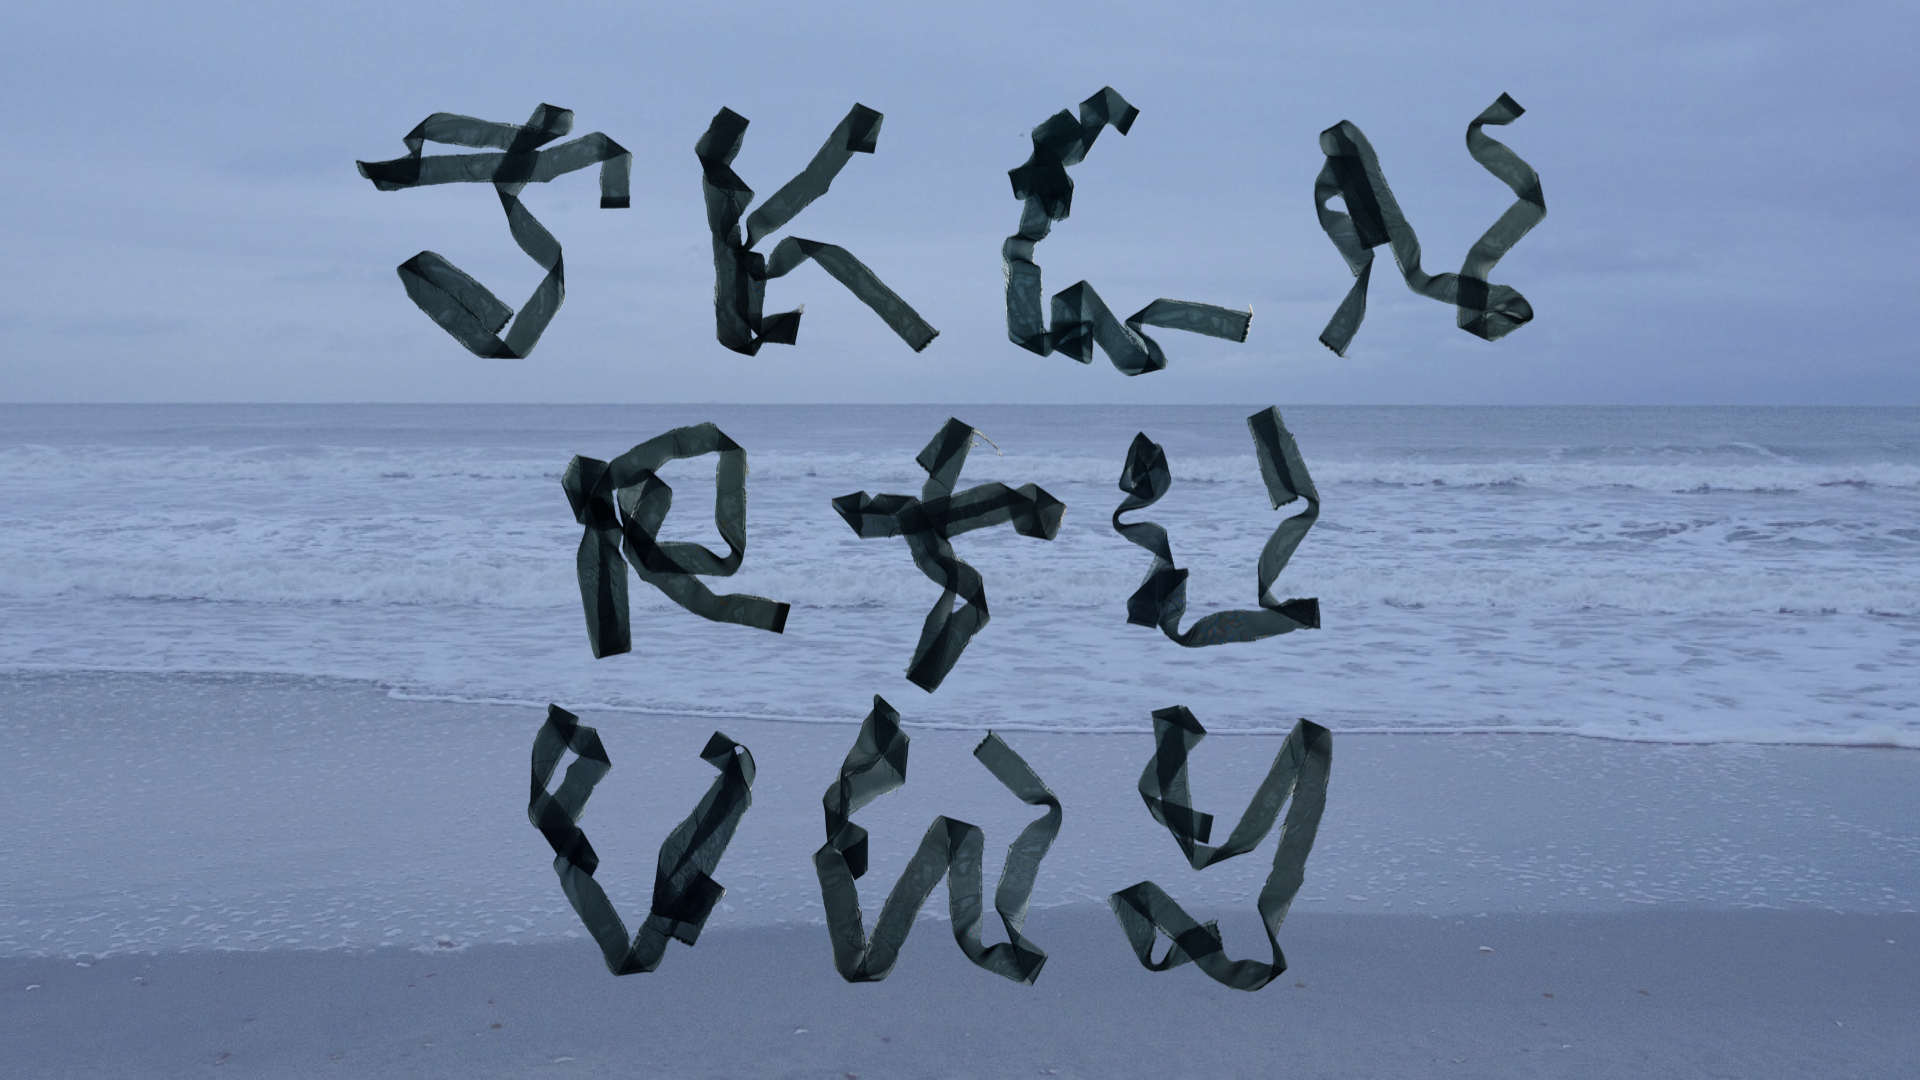 strips of material forming letters